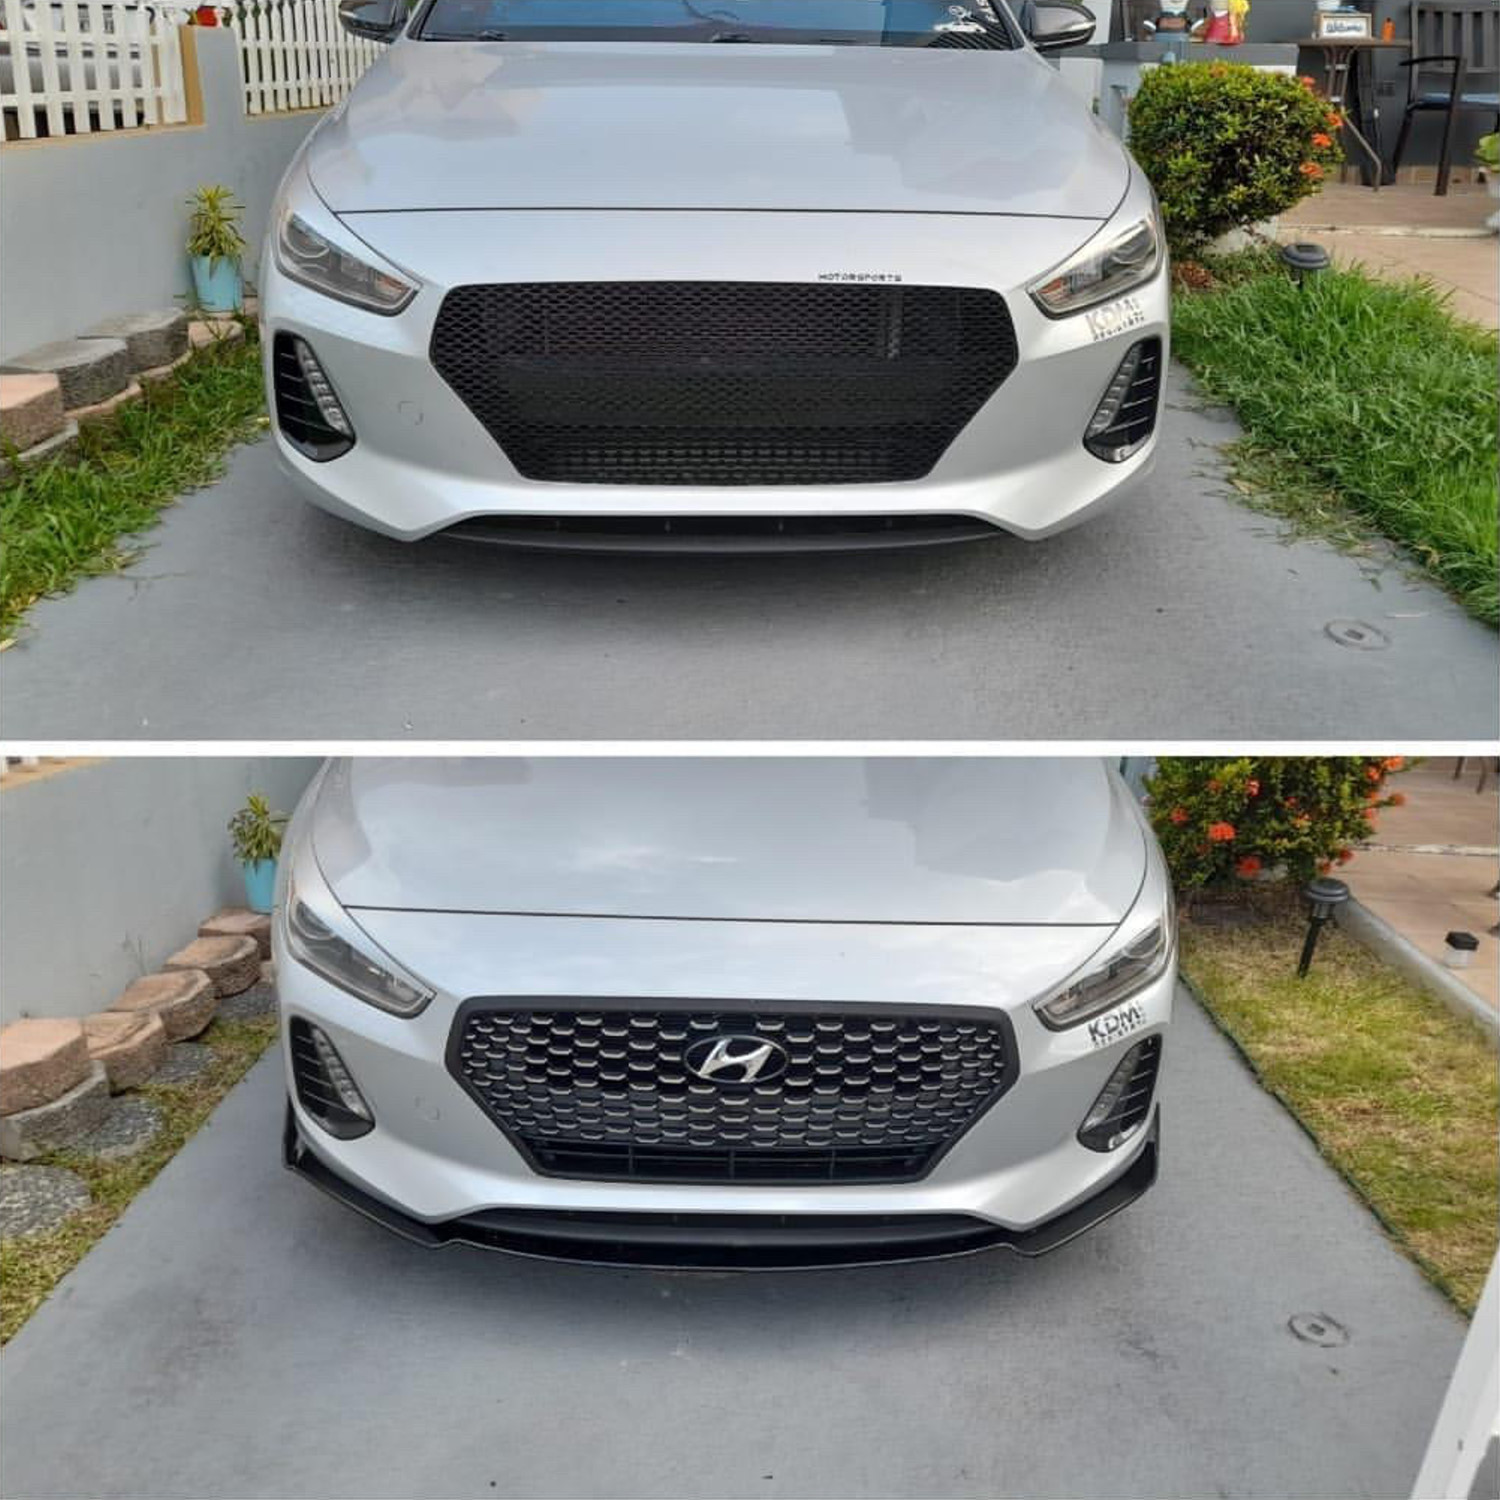 Revamping Style: Mesh Grille Replacement for Hyundai Elantra GT